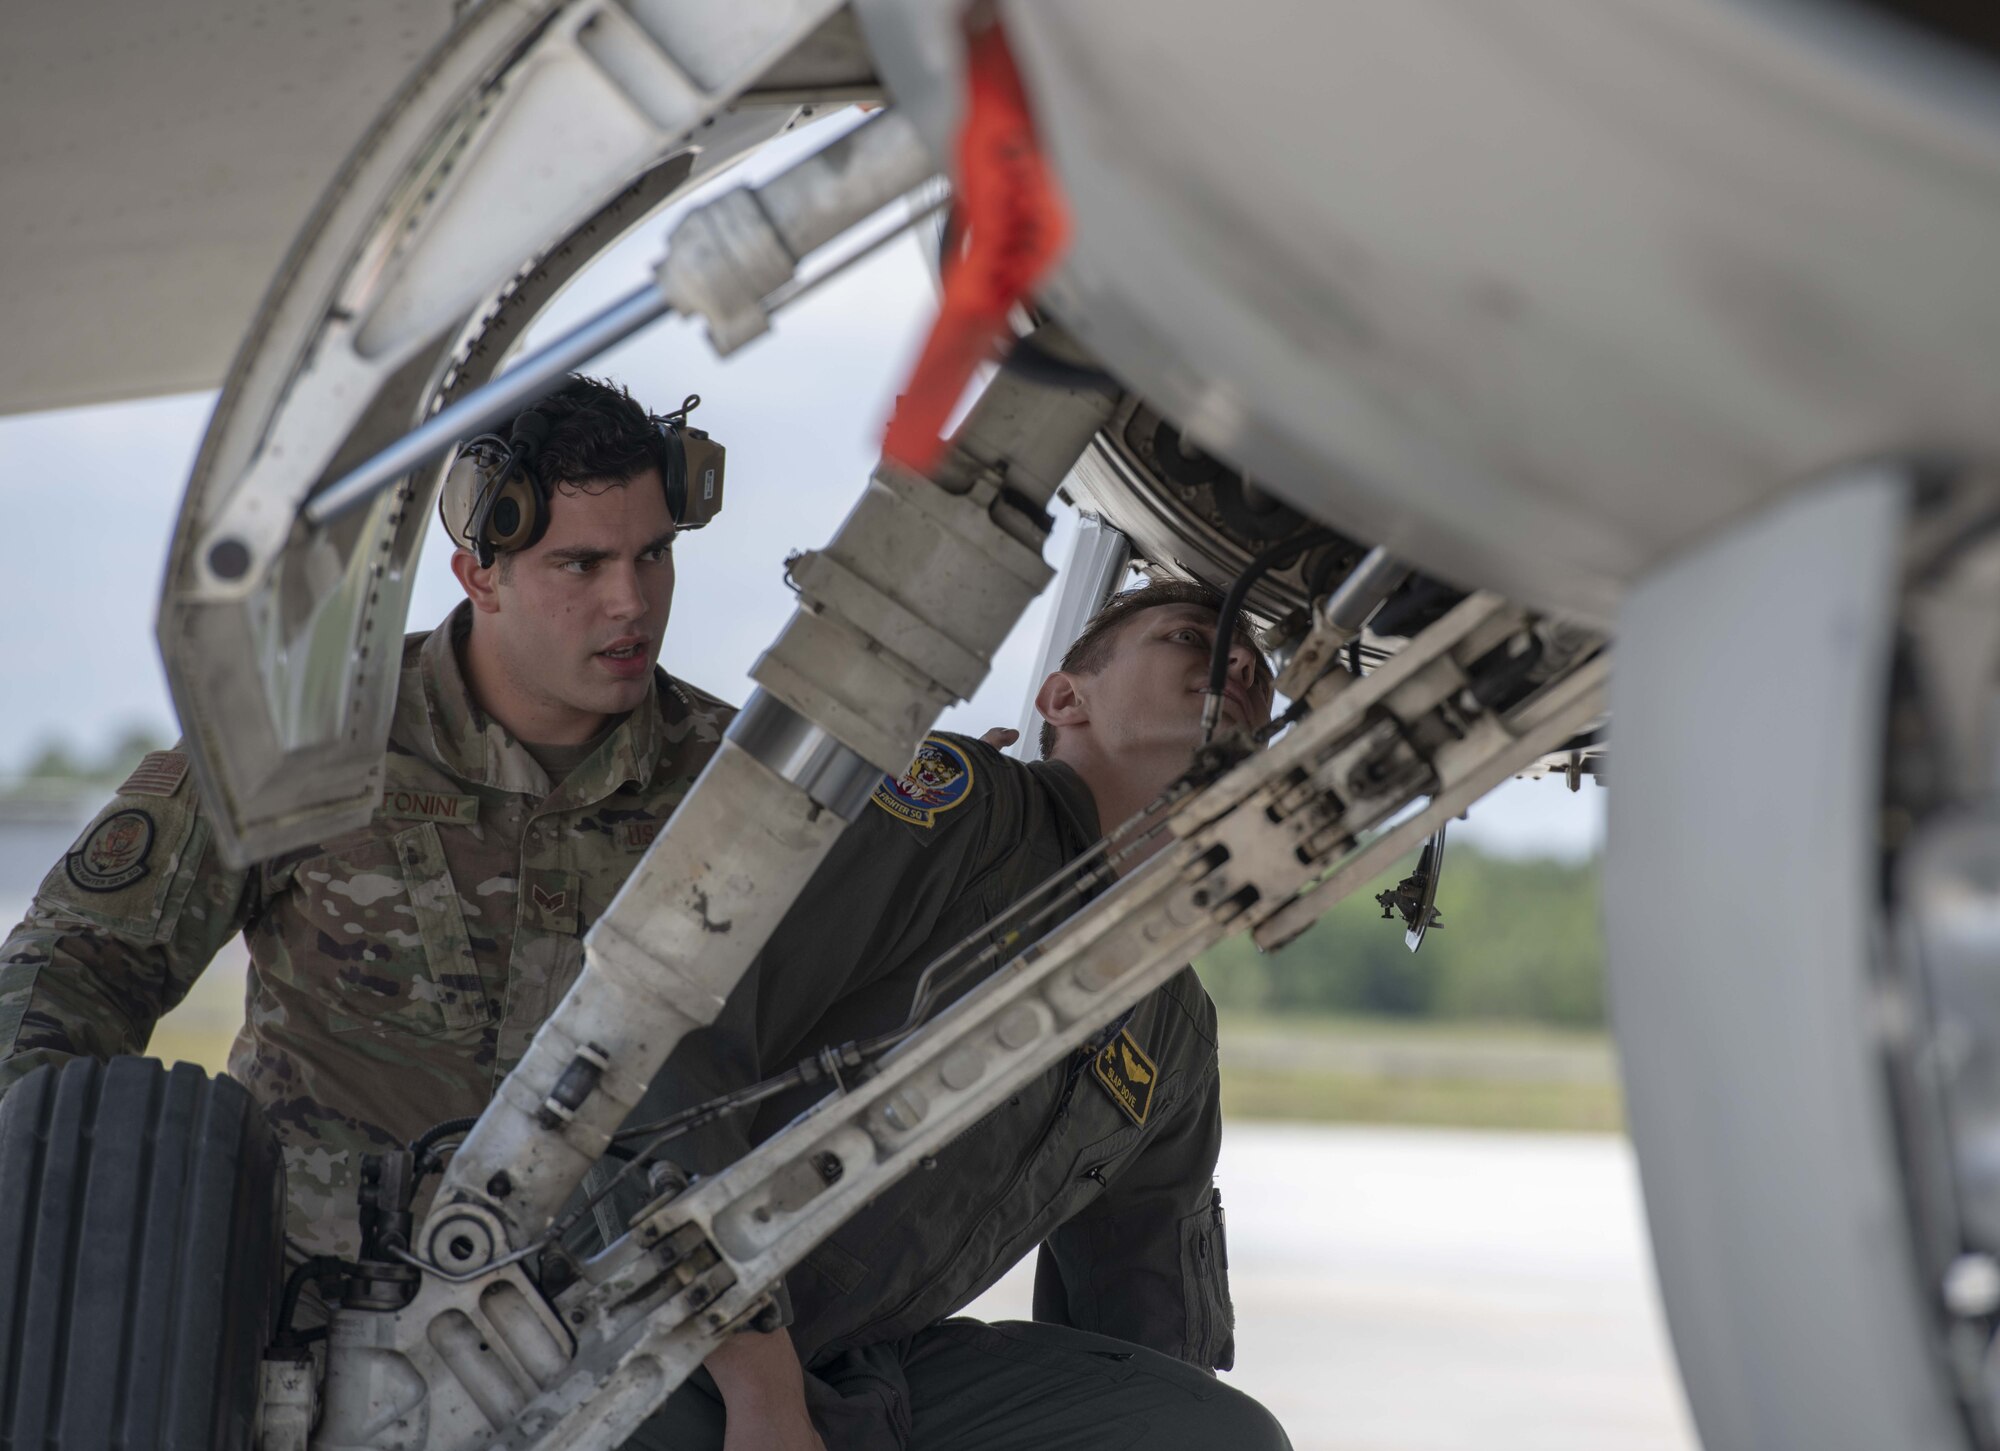 A photo of Airmen looking into a jet.